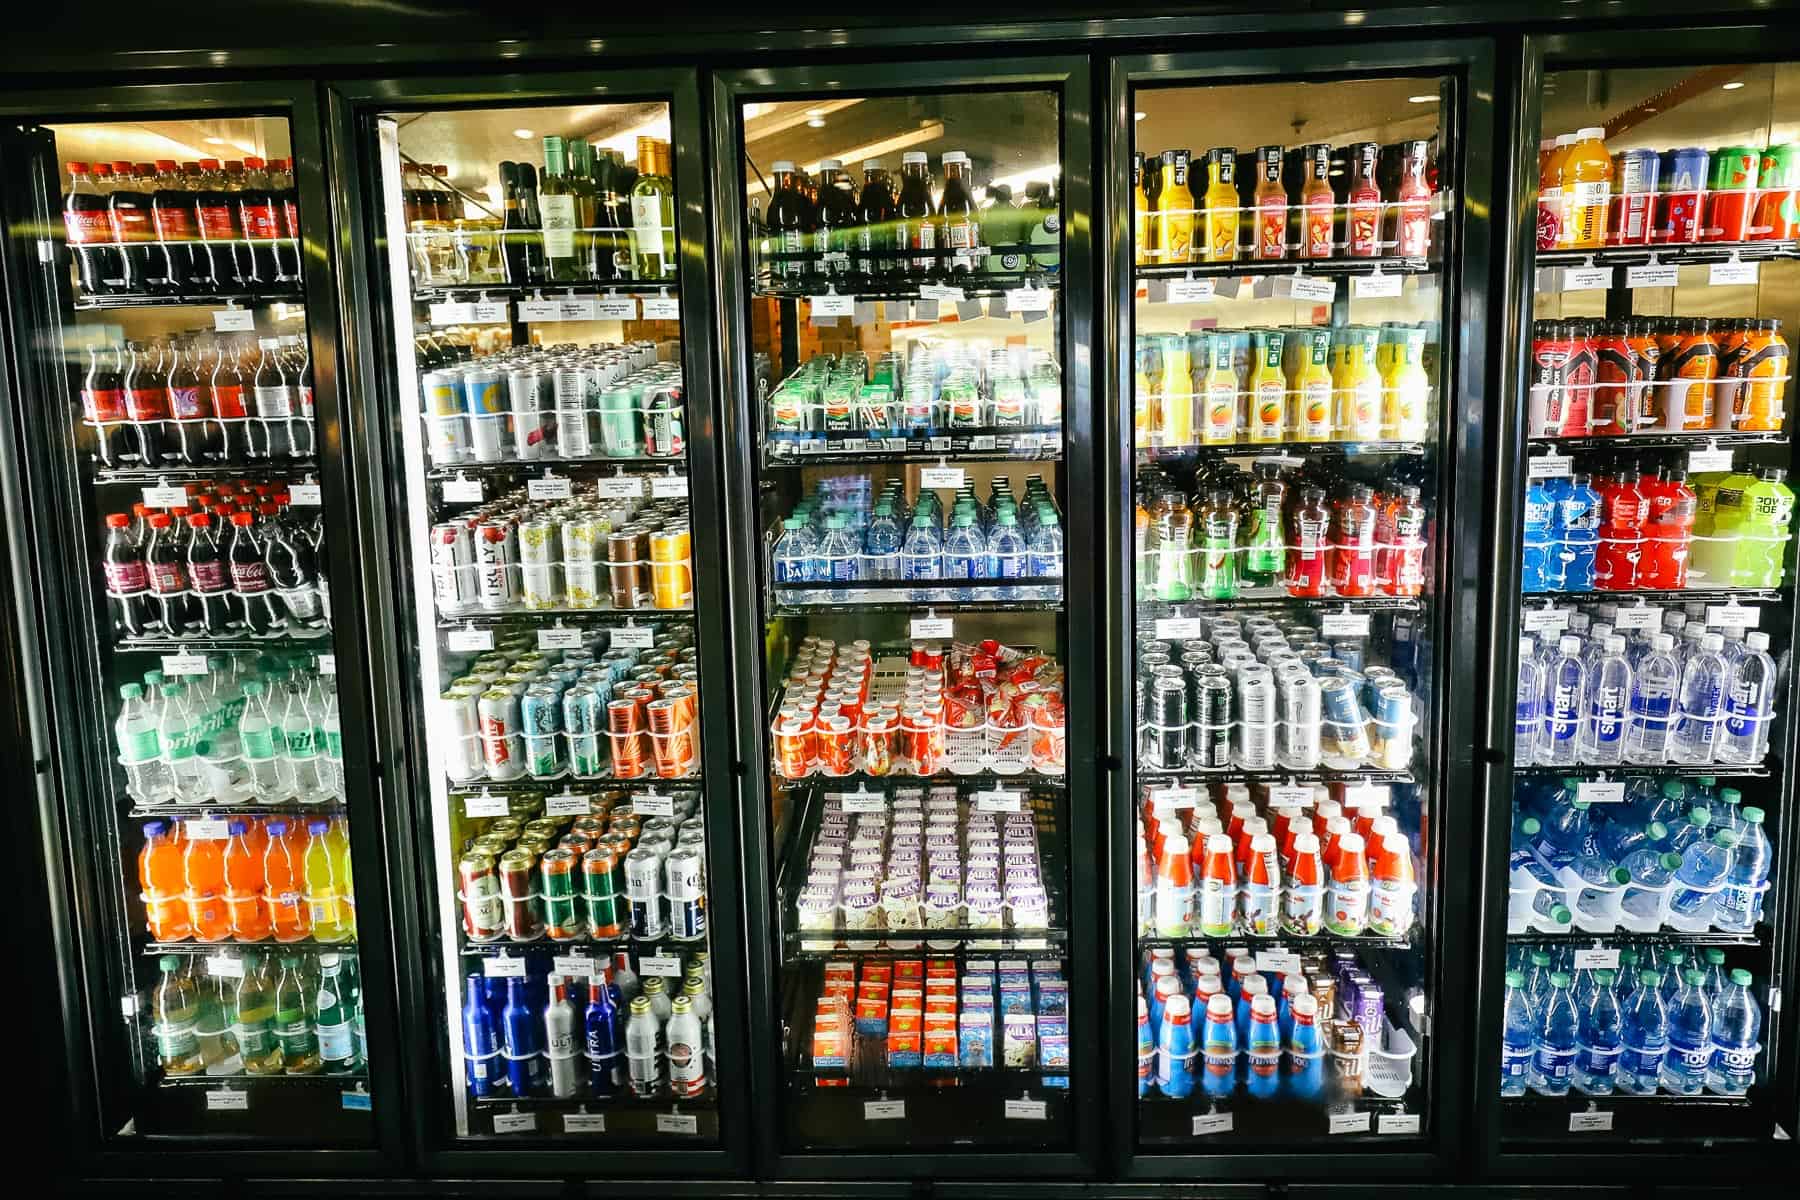 a refrigerated case with beverages like soda, milk, juice, and sports drinks 